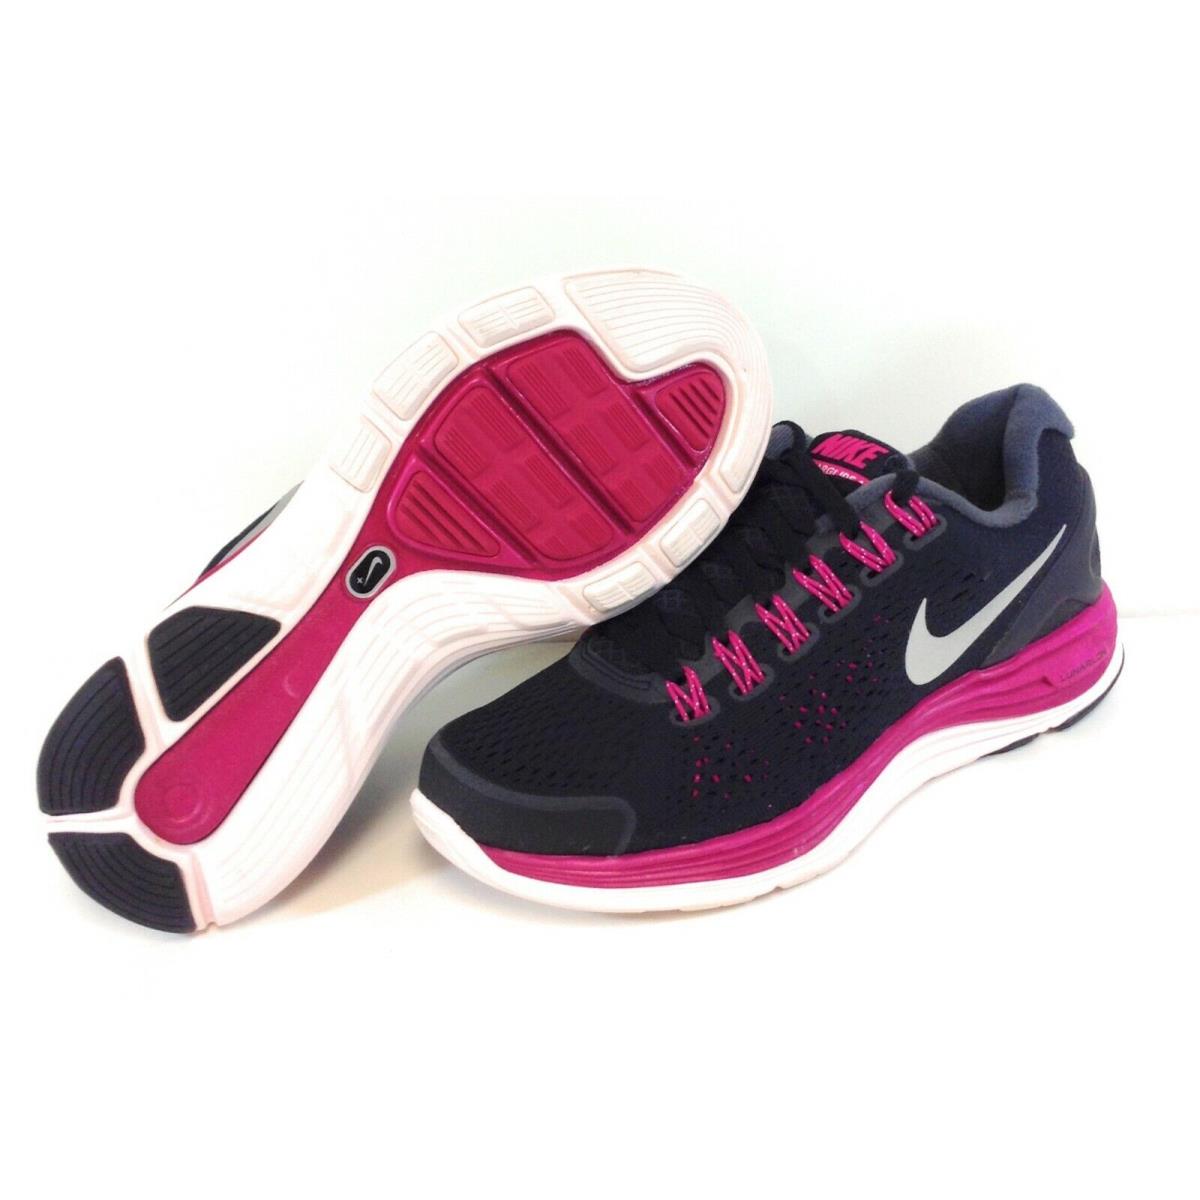 Amanecer A nueve Coronel Womens Nike Lunarglide + 4 524978 006 Black Fireberry 2012 DS Sneakers  Shoes | 883212271778 - Nike shoes - Black | SporTipTop